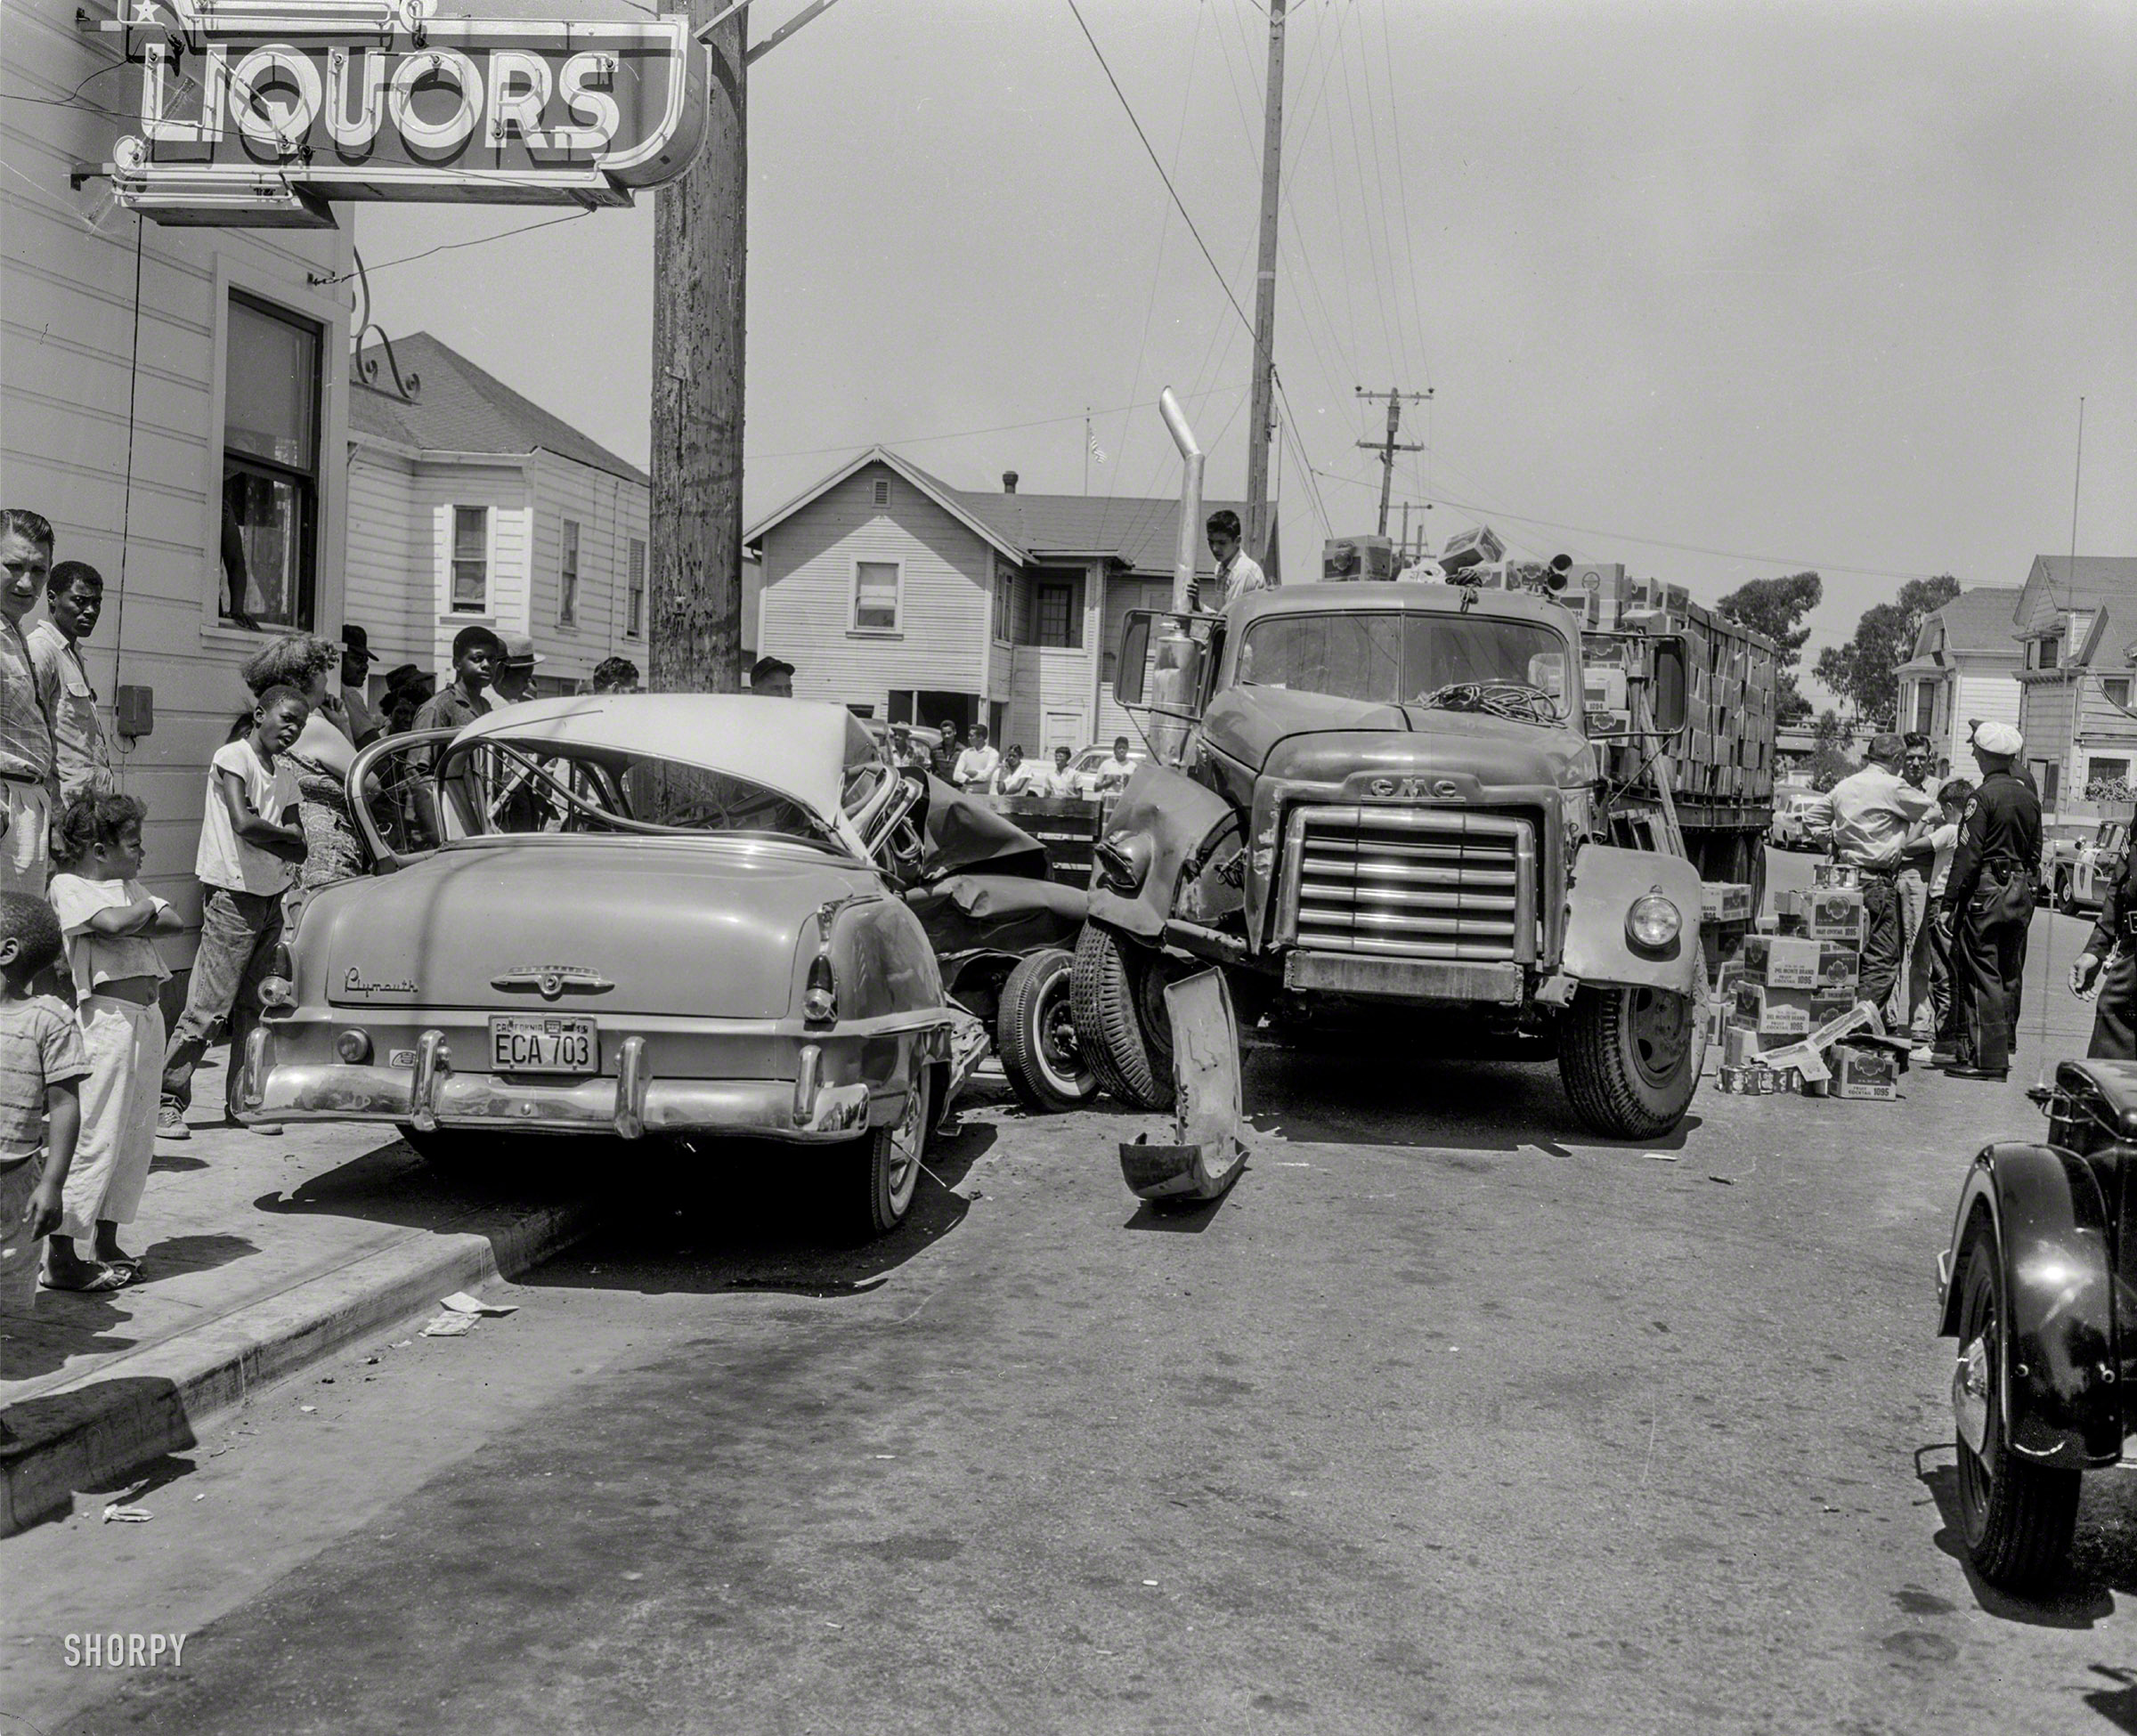 Oakland, Calif., circa 1958. Our third look at the collision between a Plymouth sedan and GMC tractor hauling a load of Del Monte canned fruit. One commenter puts us on Hollis Street in Emeryville. View full size.